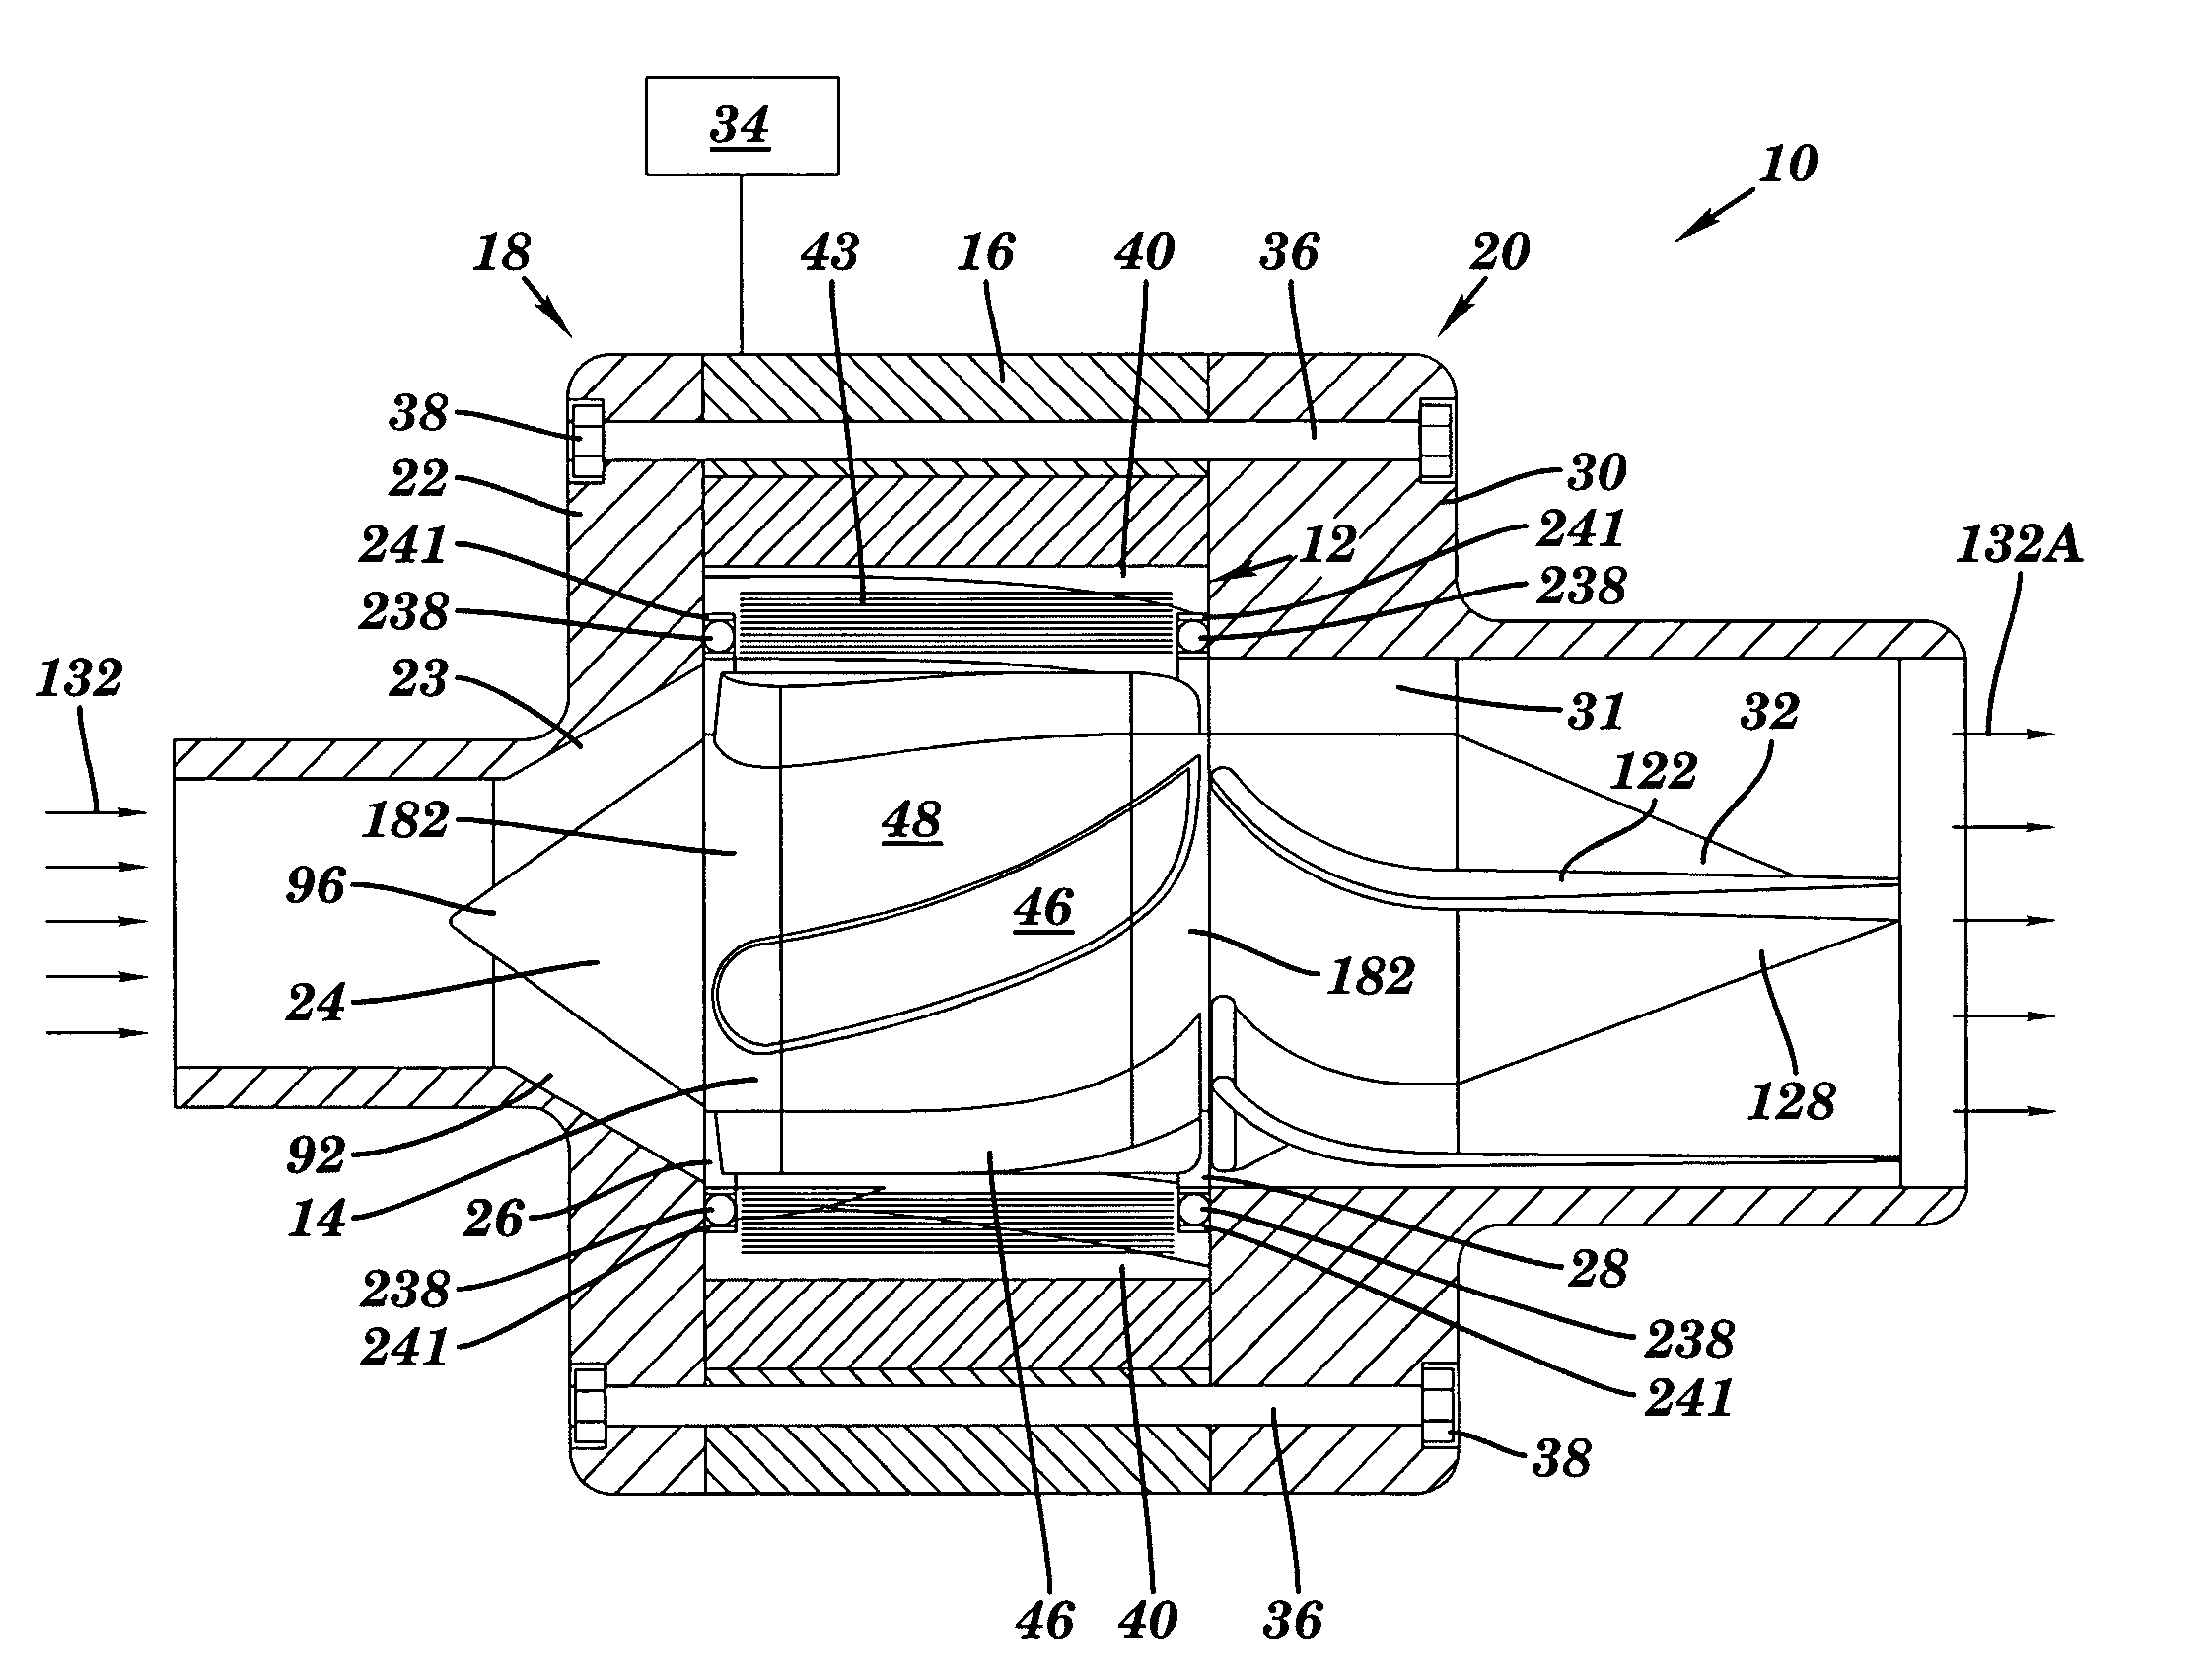 Fluid pump/generator with integrated motor and related stator and rotor and method of pumping fluid